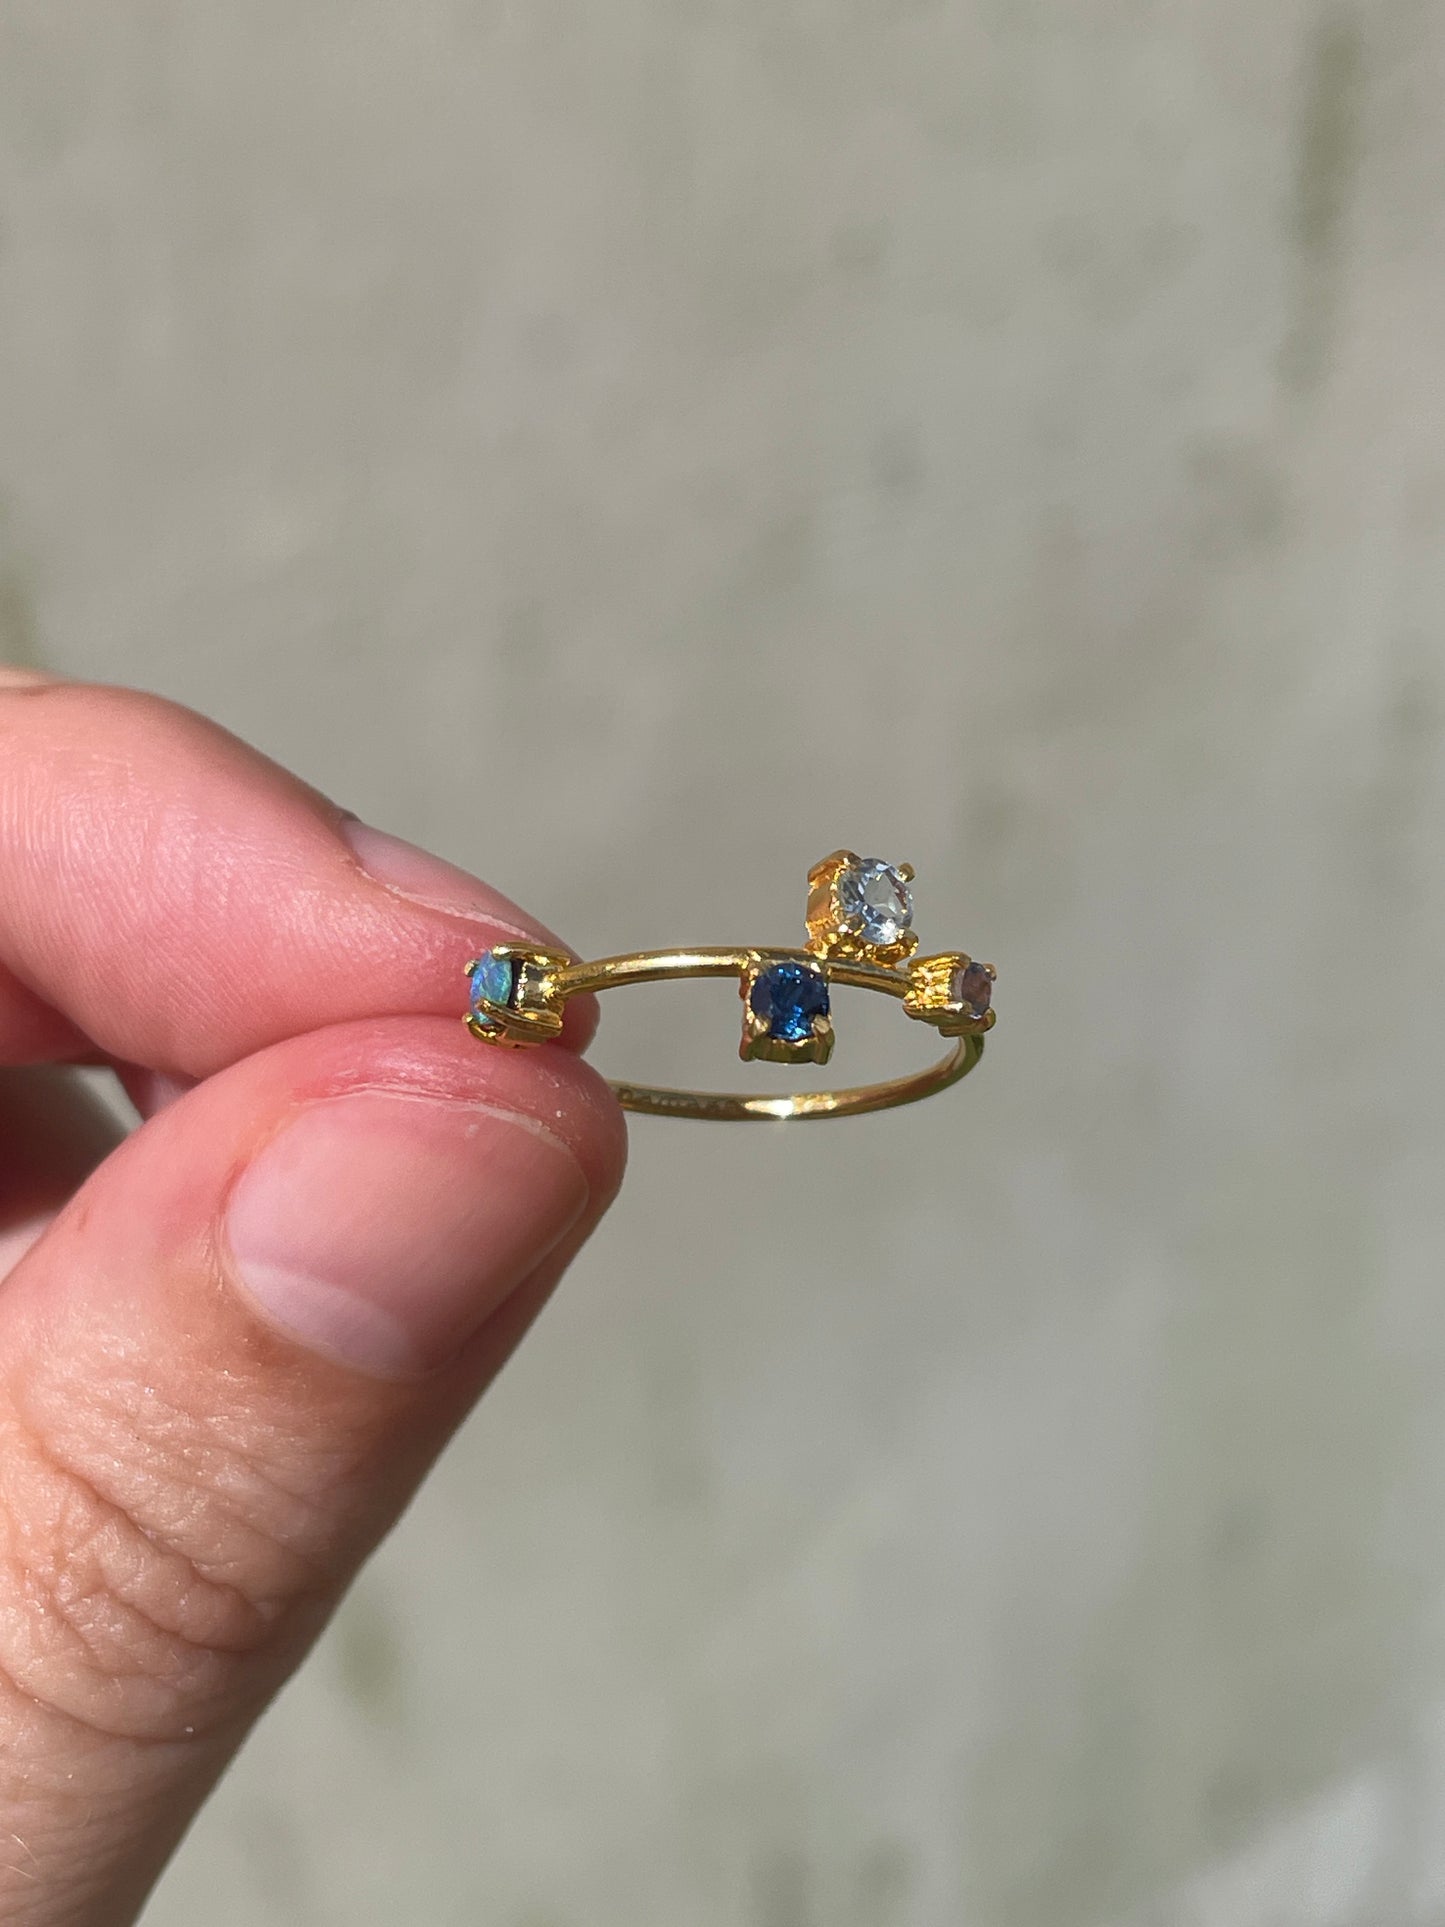 Galaxy Ring Gold with Ultramarine Blue Sapphires and Opals - size 6.5